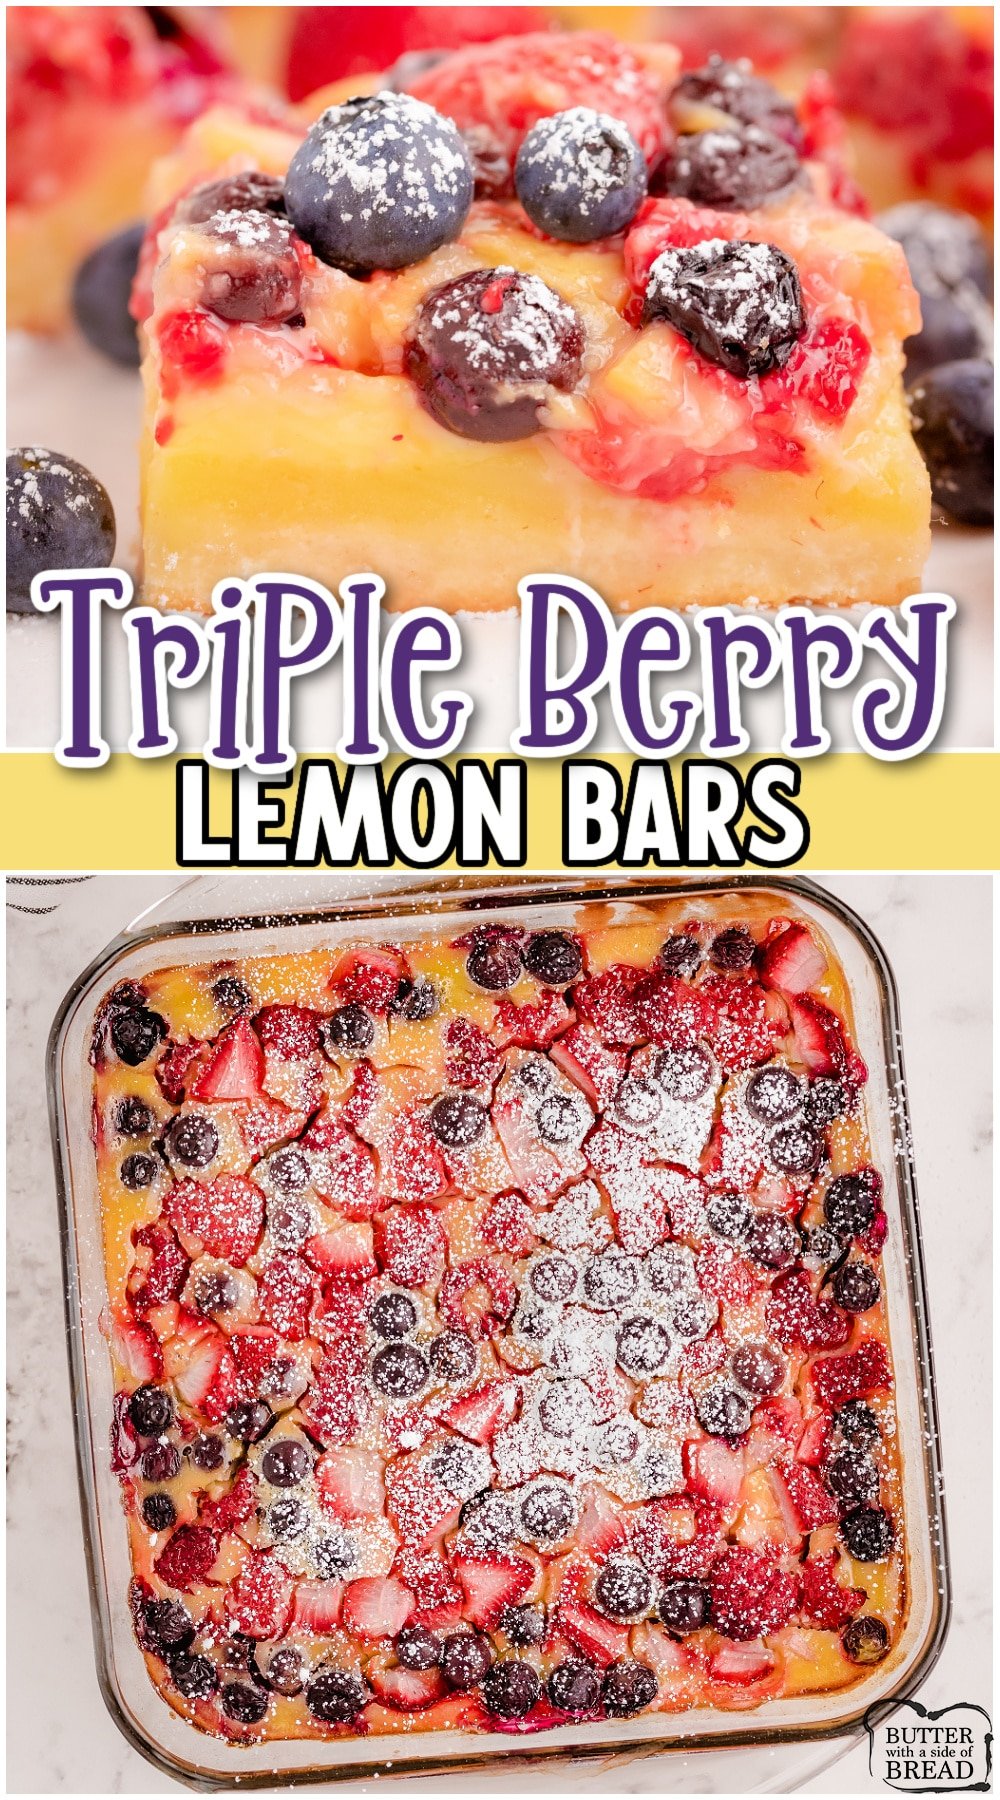 Berry Lemon Bars are a delightful lemon dessert with fresh berries! The fresh fruit in this lemon bar recipe pairs beautifully with the creamy tart filling for unique, flavorful treat.